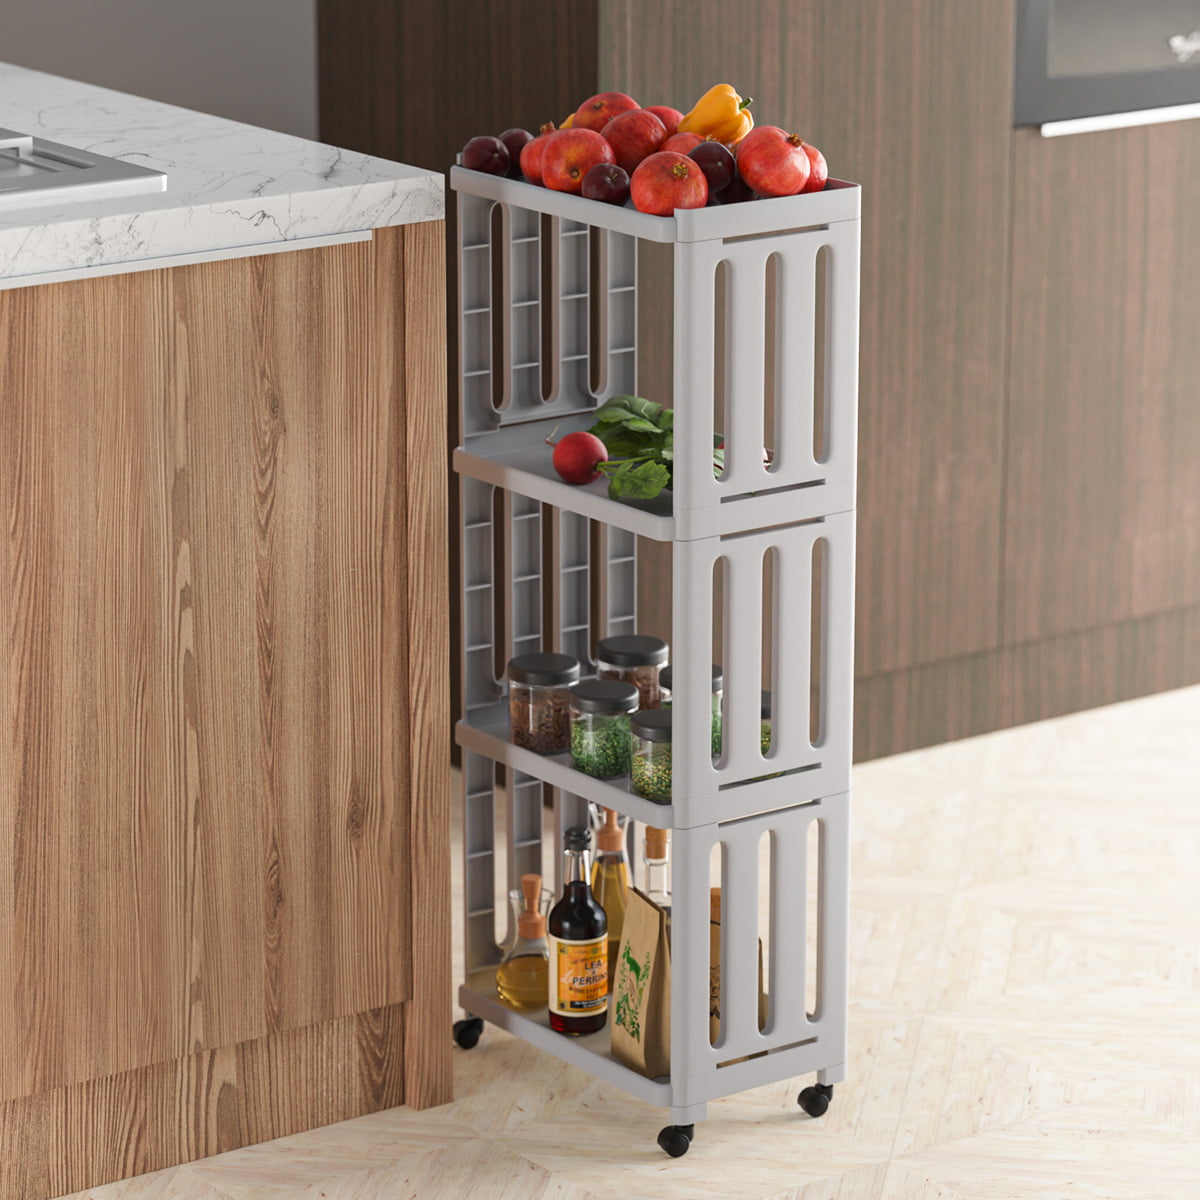 Details about   3/4 Tier Utility Rolling Storage Trolley Cart Slim Slide Organizer with Wheels 